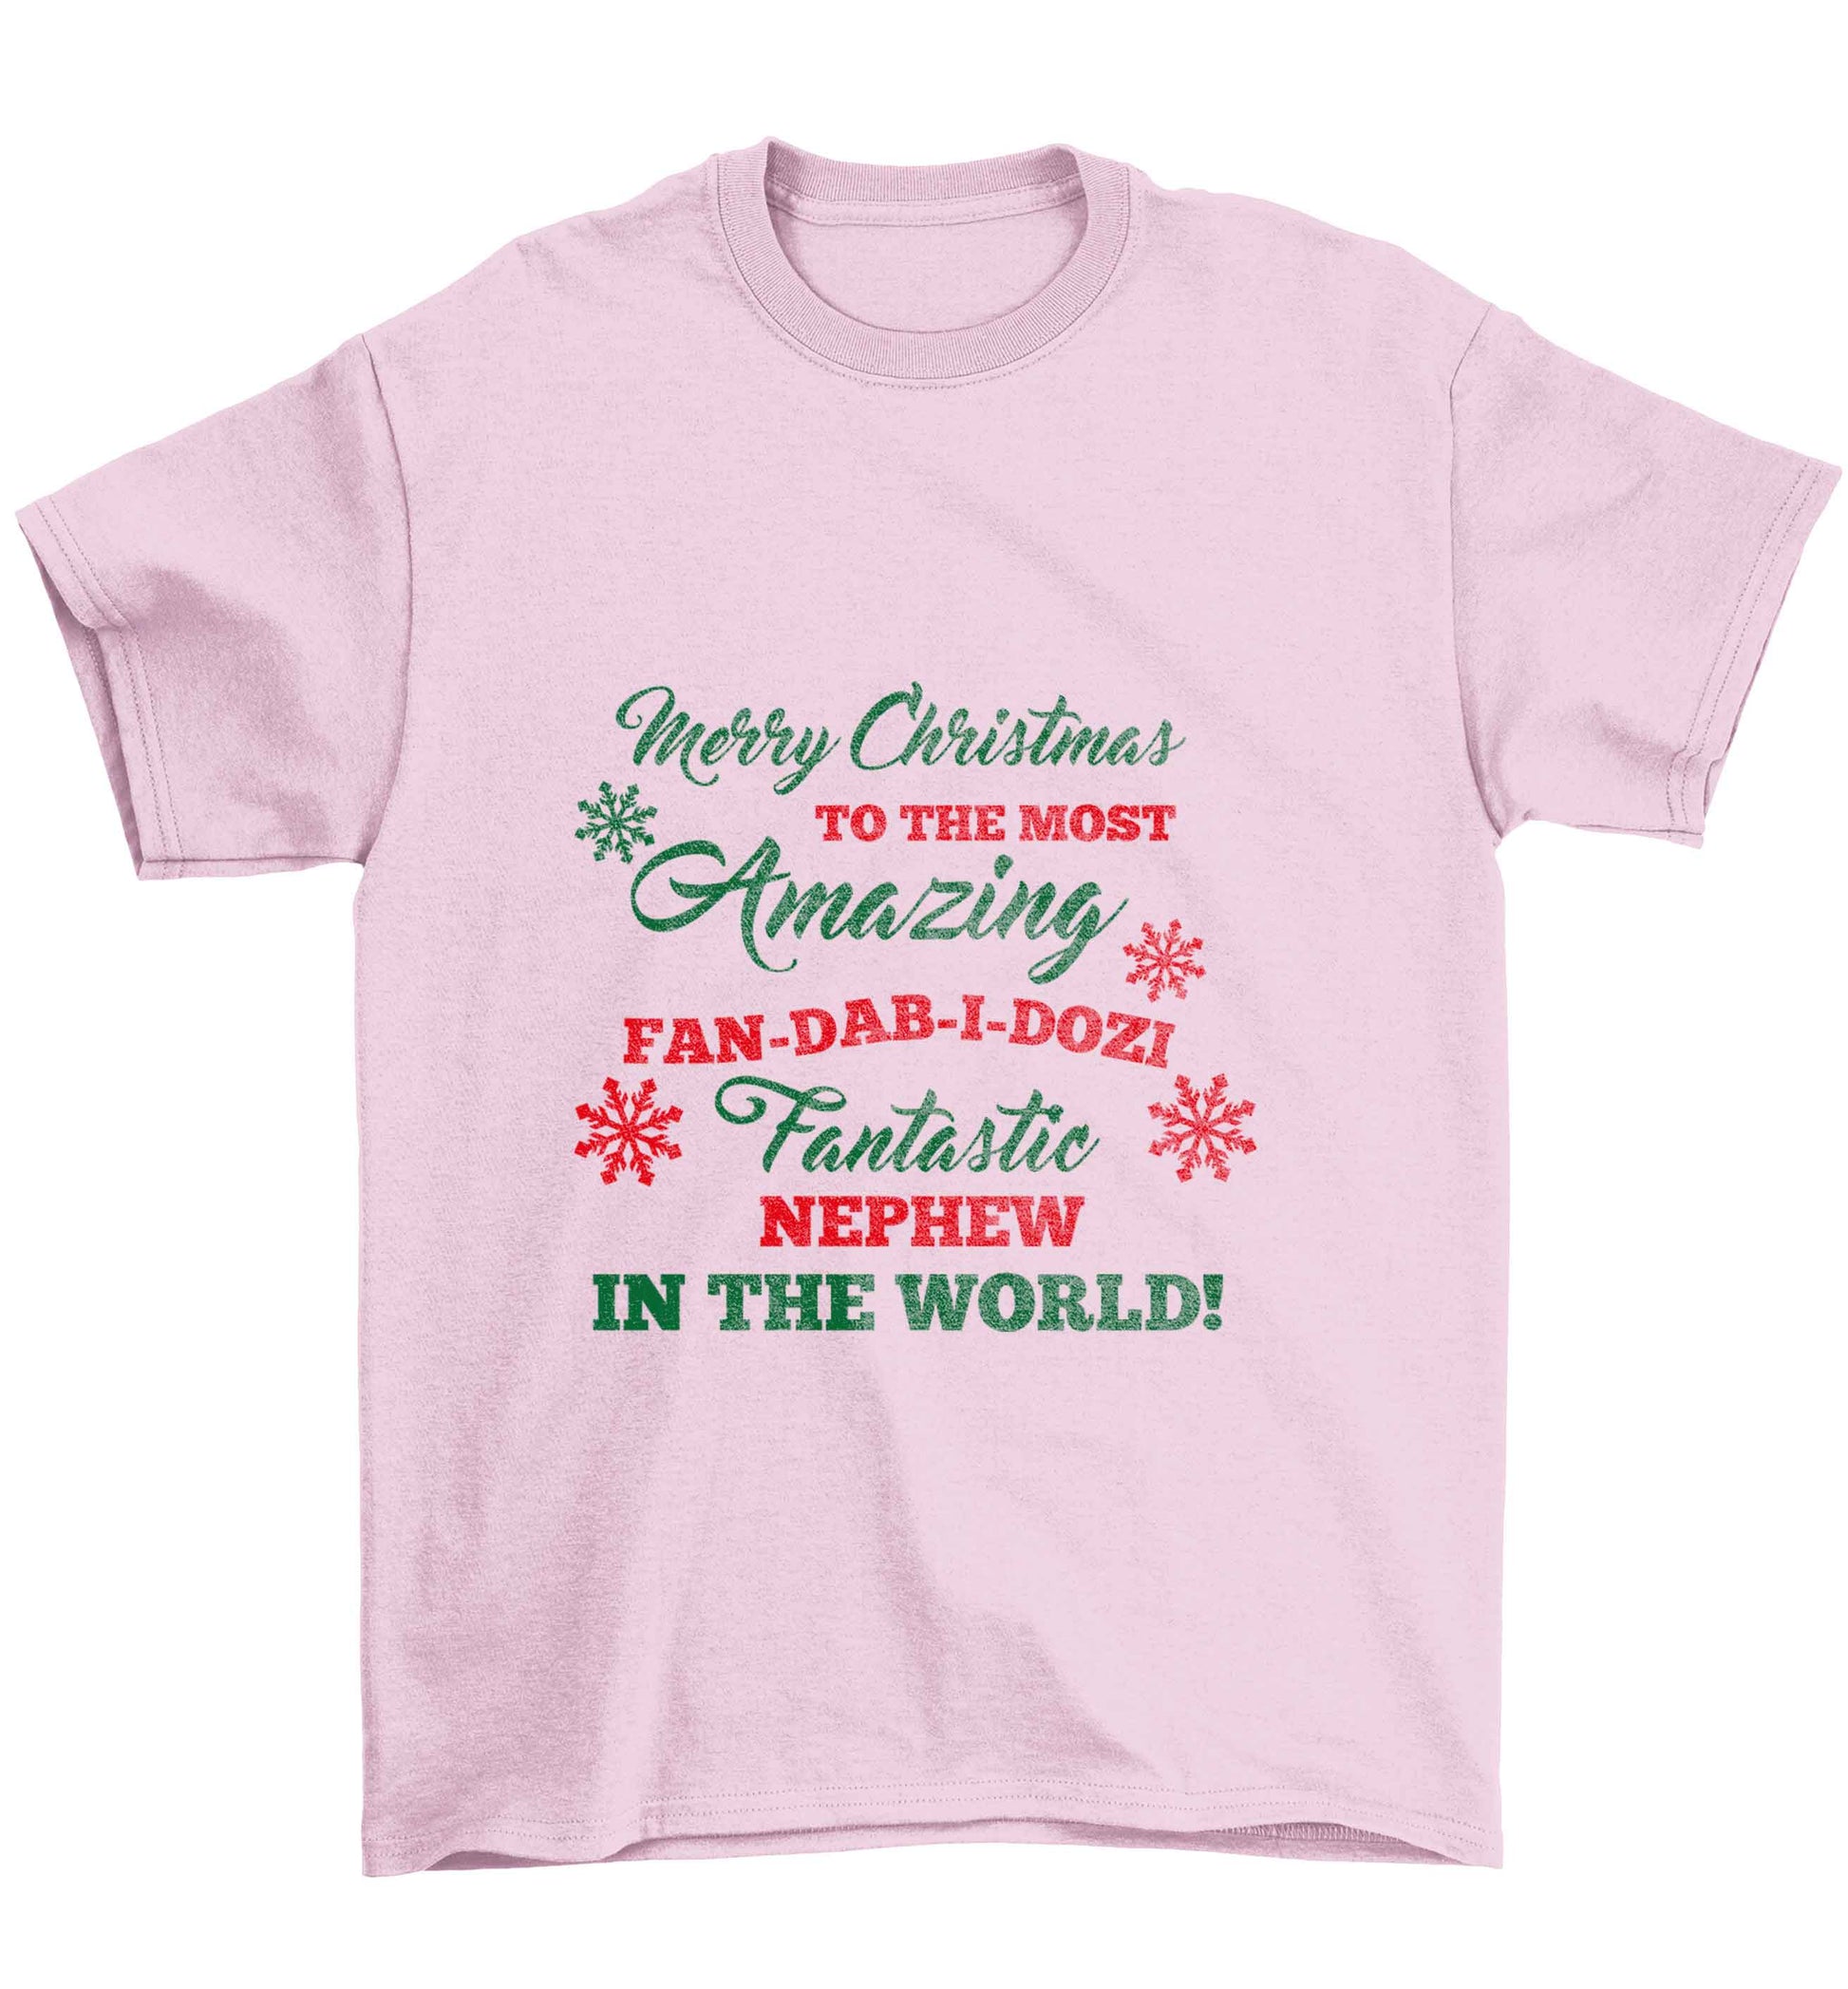 Merry Christmas to the most amazing fan-dab-i-dozi fantasic Nephew in the world Children's light pink Tshirt 12-13 Years